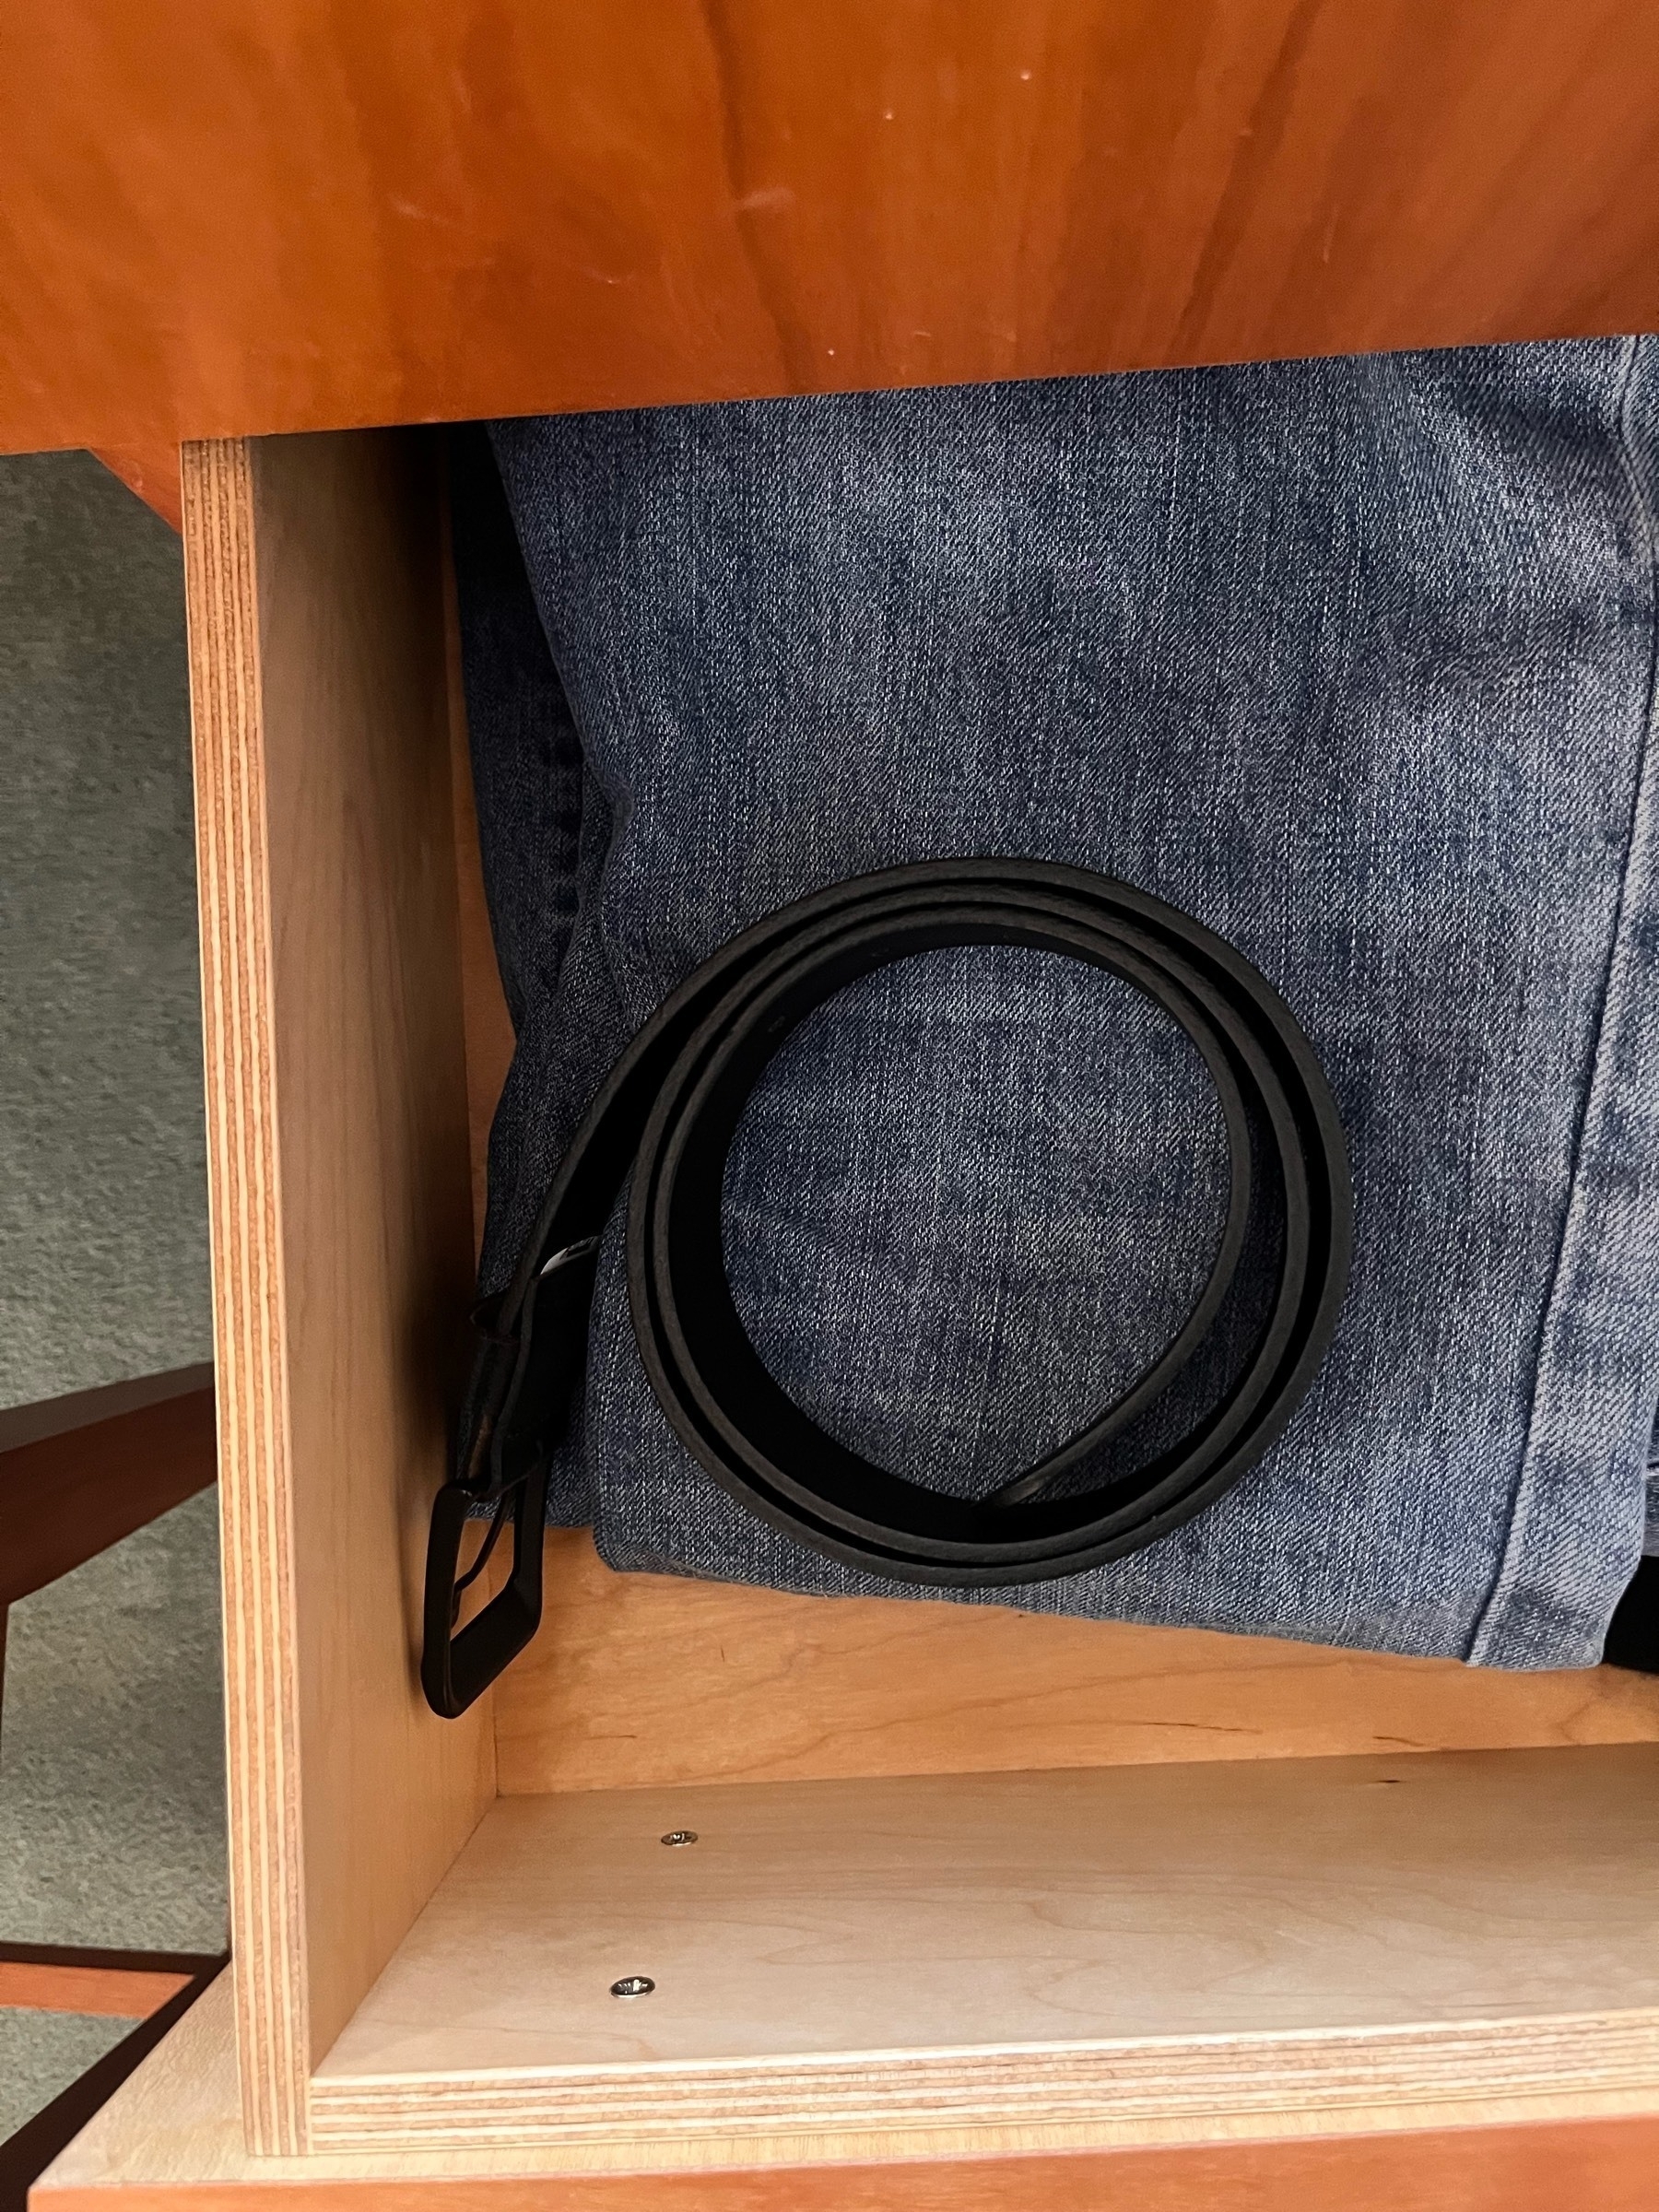 Belt sitting on a pair of jeans in a draw